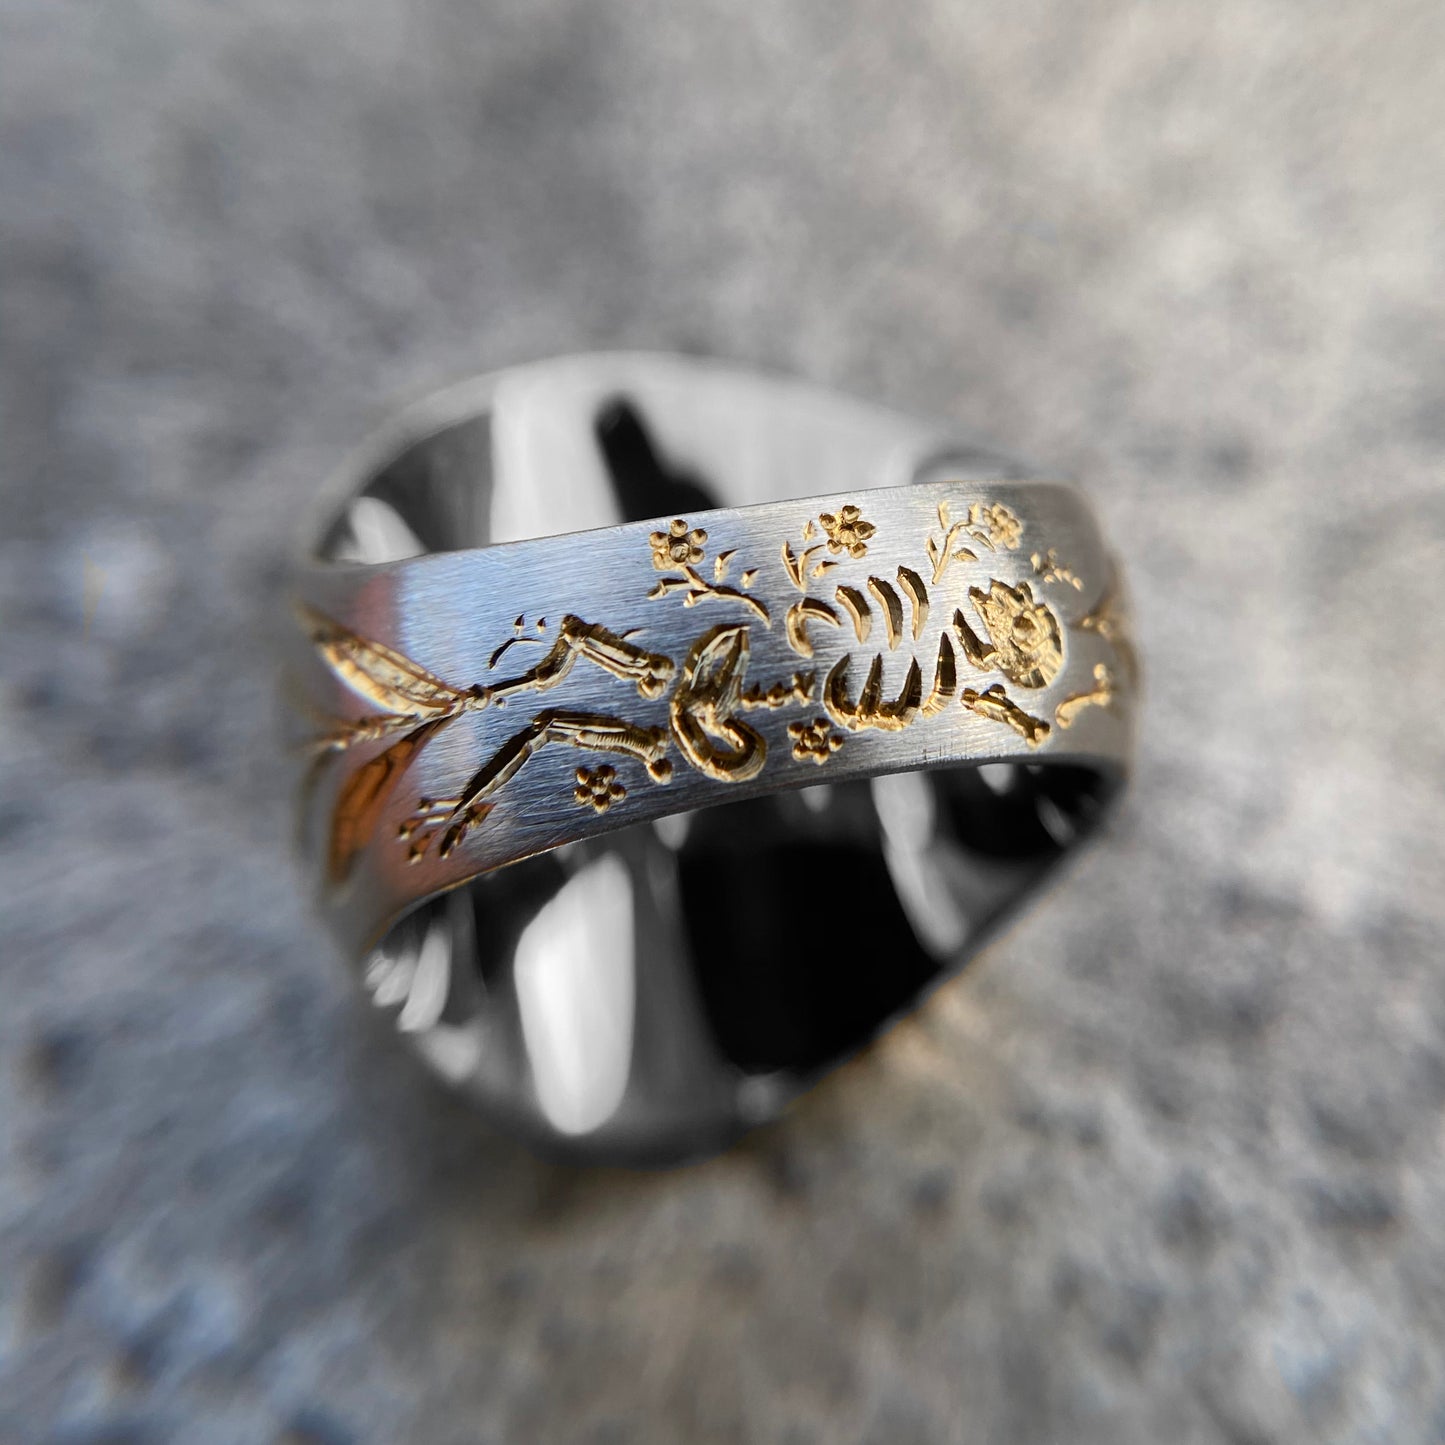 Castro Smith - Hand engraved signet ring with a sunflower on the face of the ring and corn details on the sides and skeleton at the bottom of the band. 